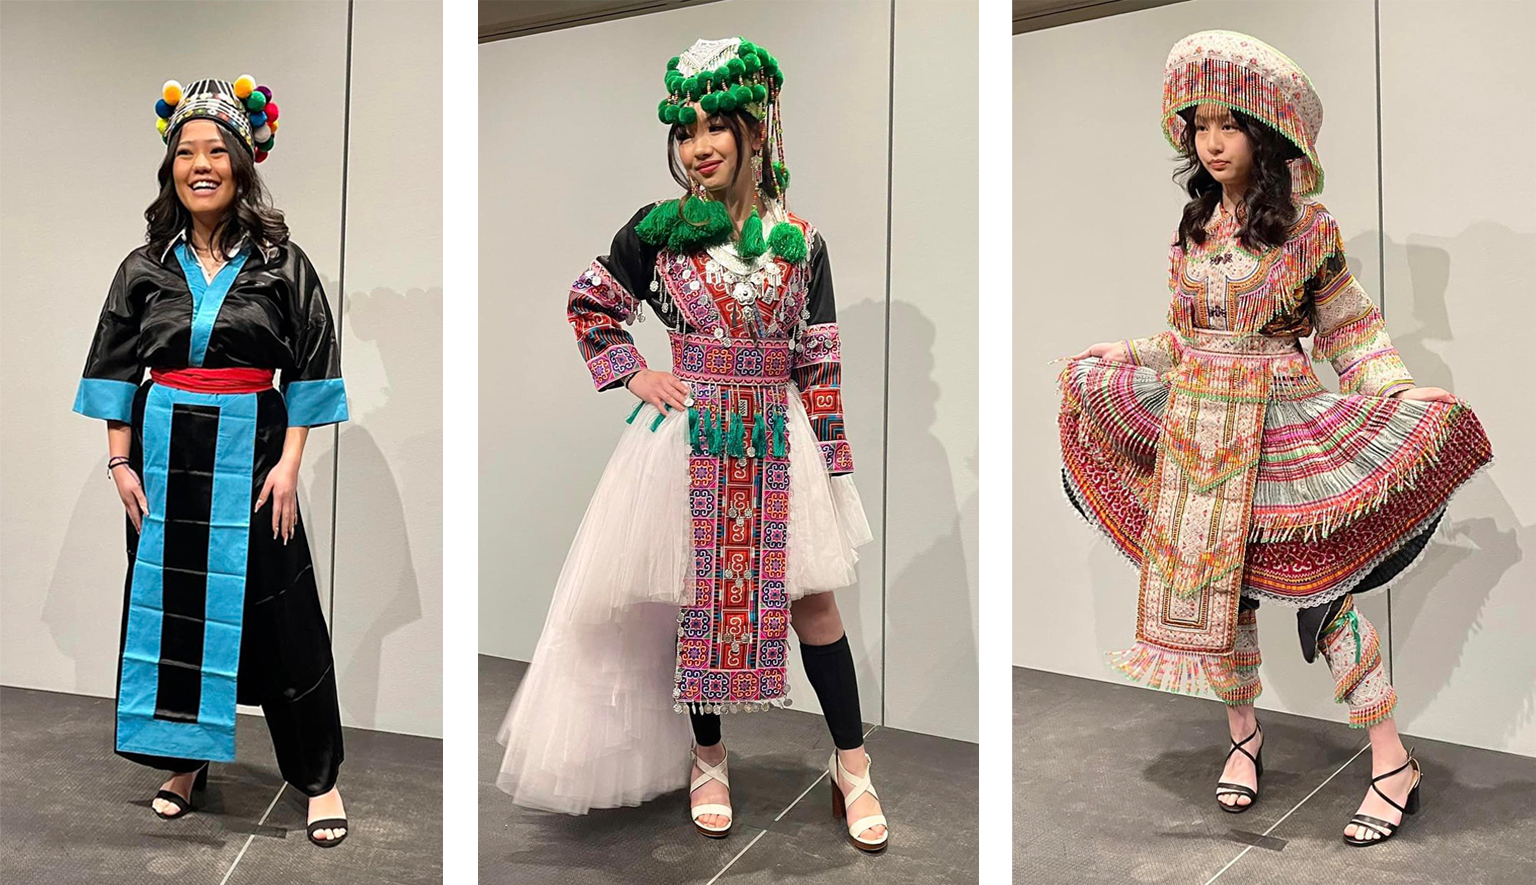 Three young models pose wearing traditional and cultural Hmong clothing.